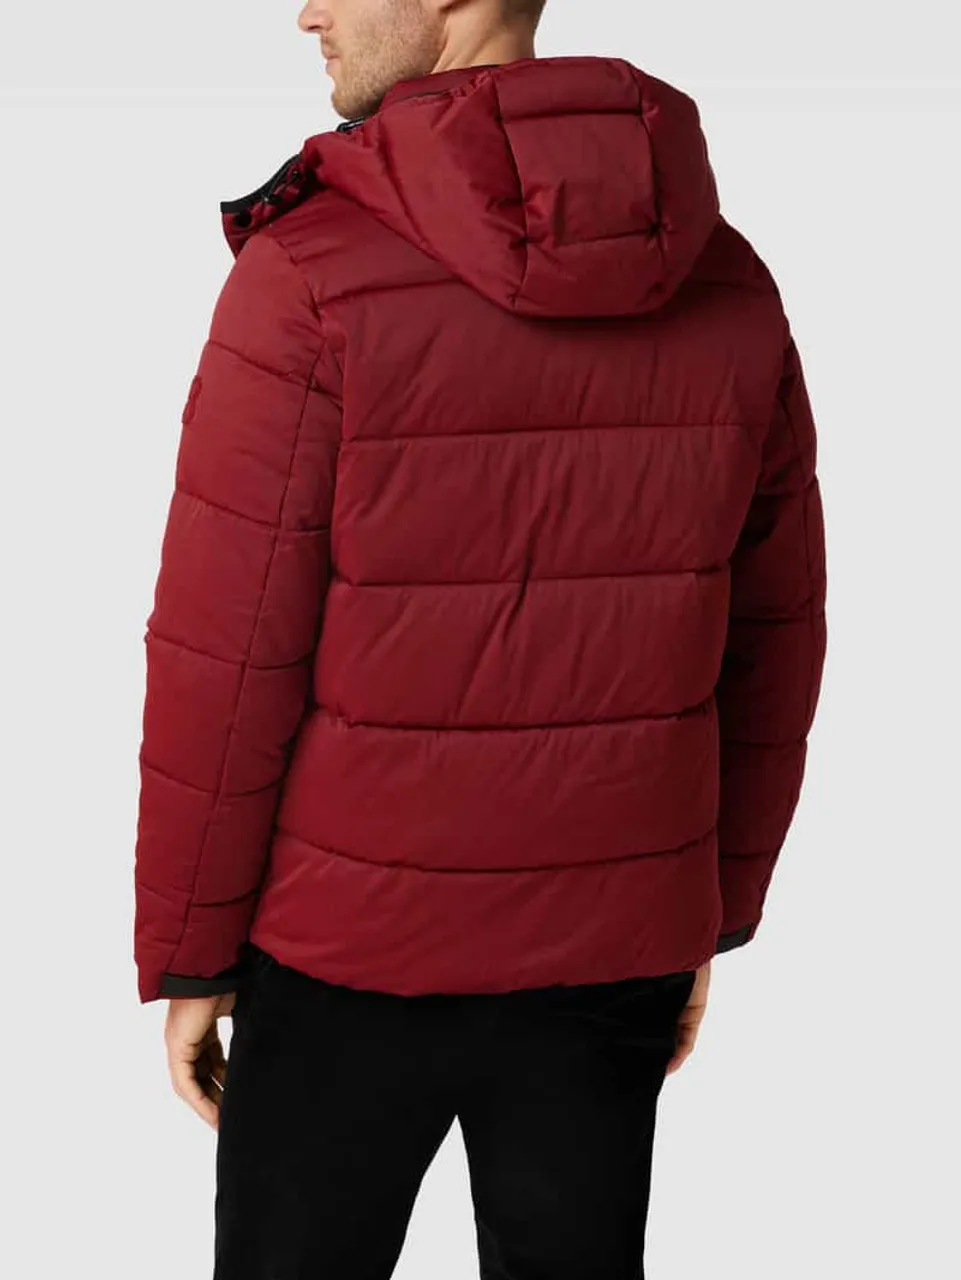 s.Oliver RED LABEL Jacke mit Label-Patch in Dunkelrot